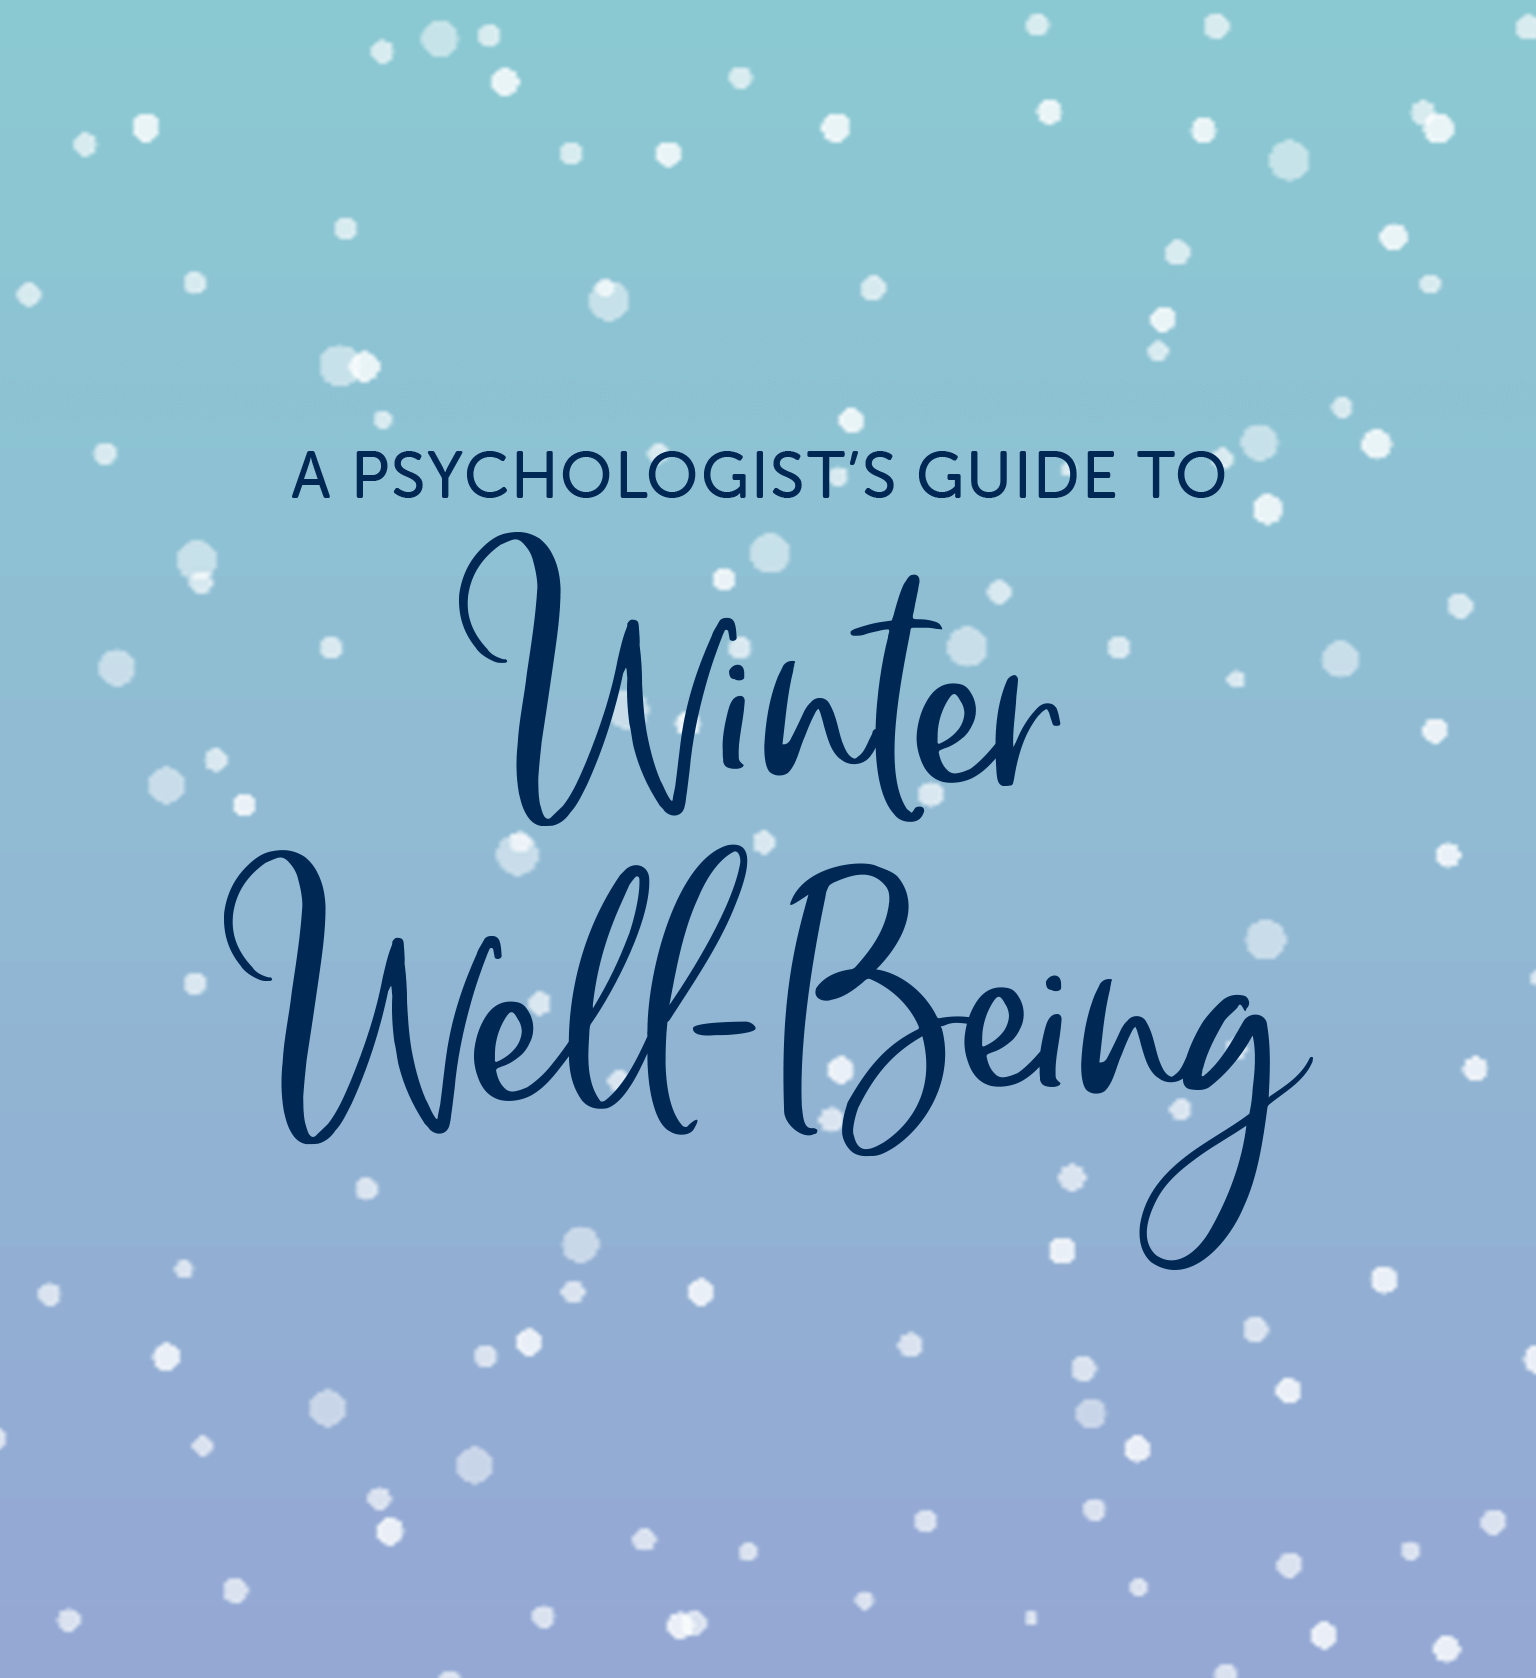 A psychologist's guide to winter well-being